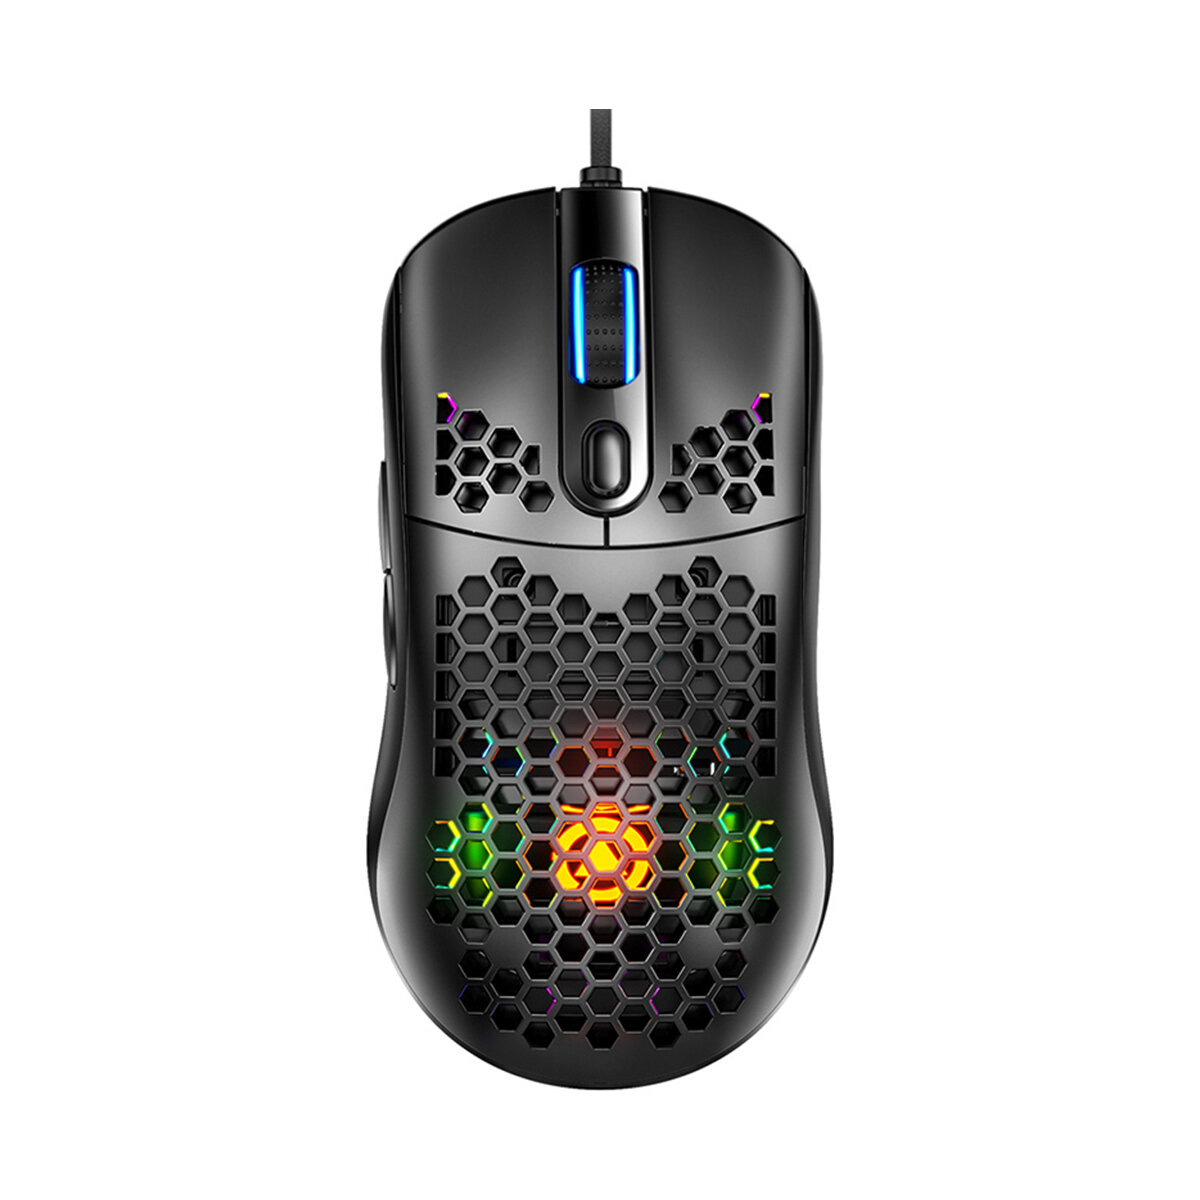 YINDIAO G7 Wired Gaming Mouse 7200 DPI RGB Backlight Computermuis Honingraat Holle Muizen voor Compu